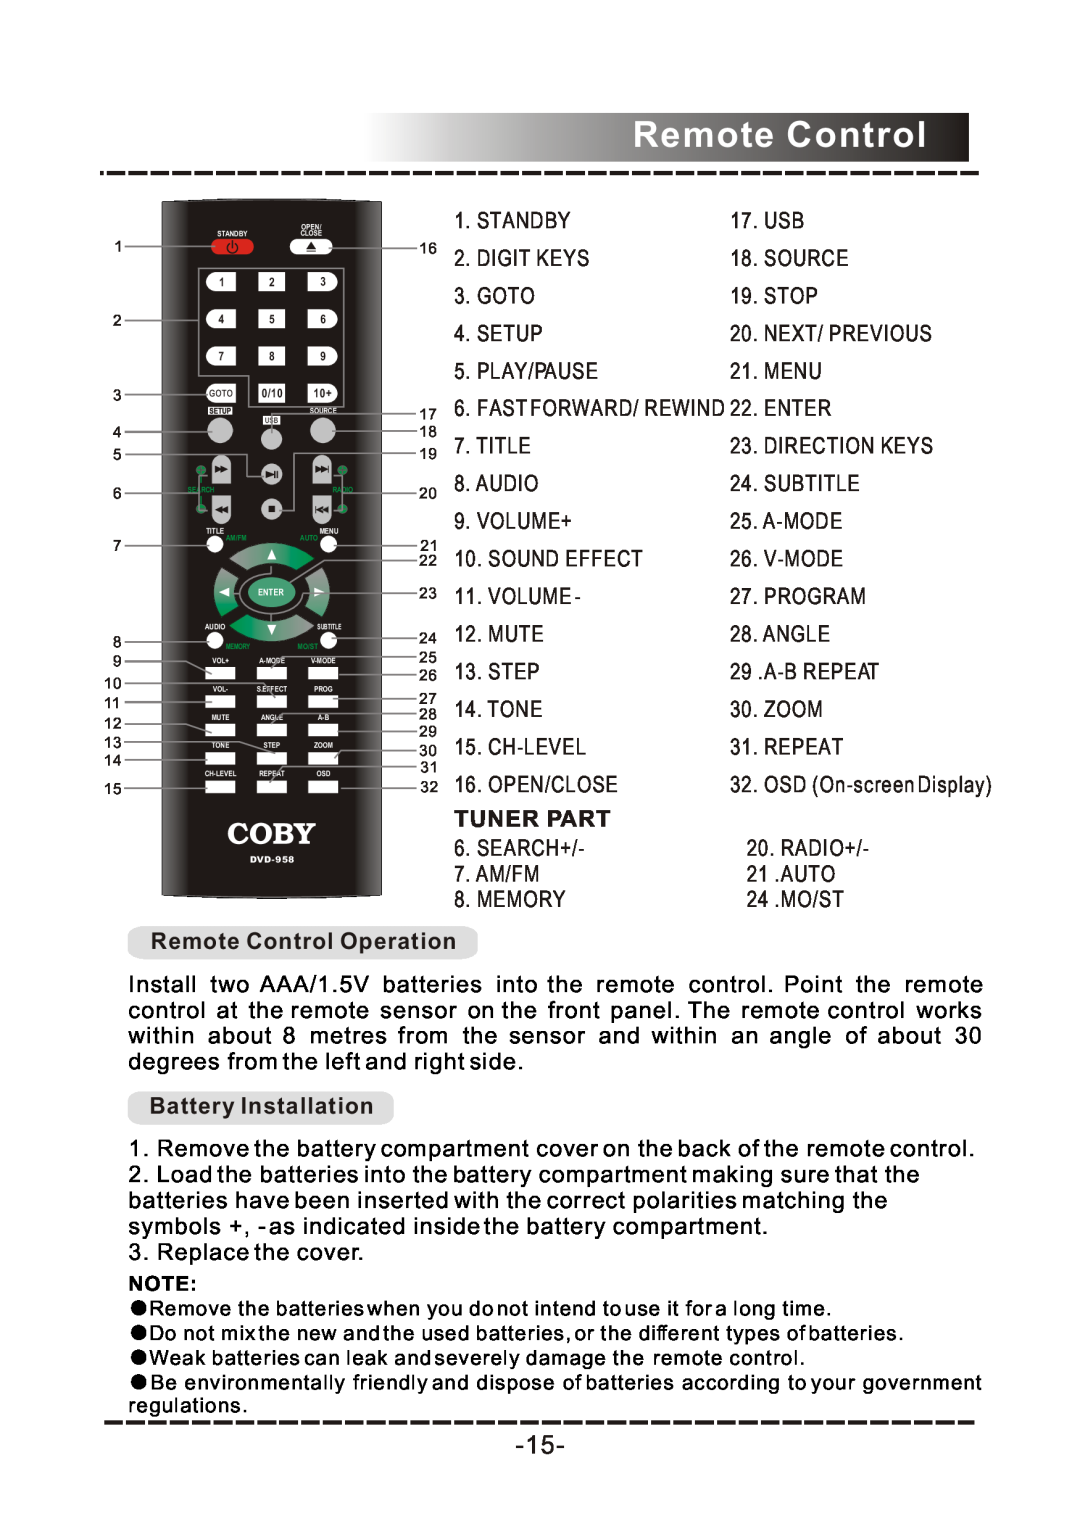 COBY electronic DVD-958 manual Tuner Part, Remote Control Operation, Battery Installation 